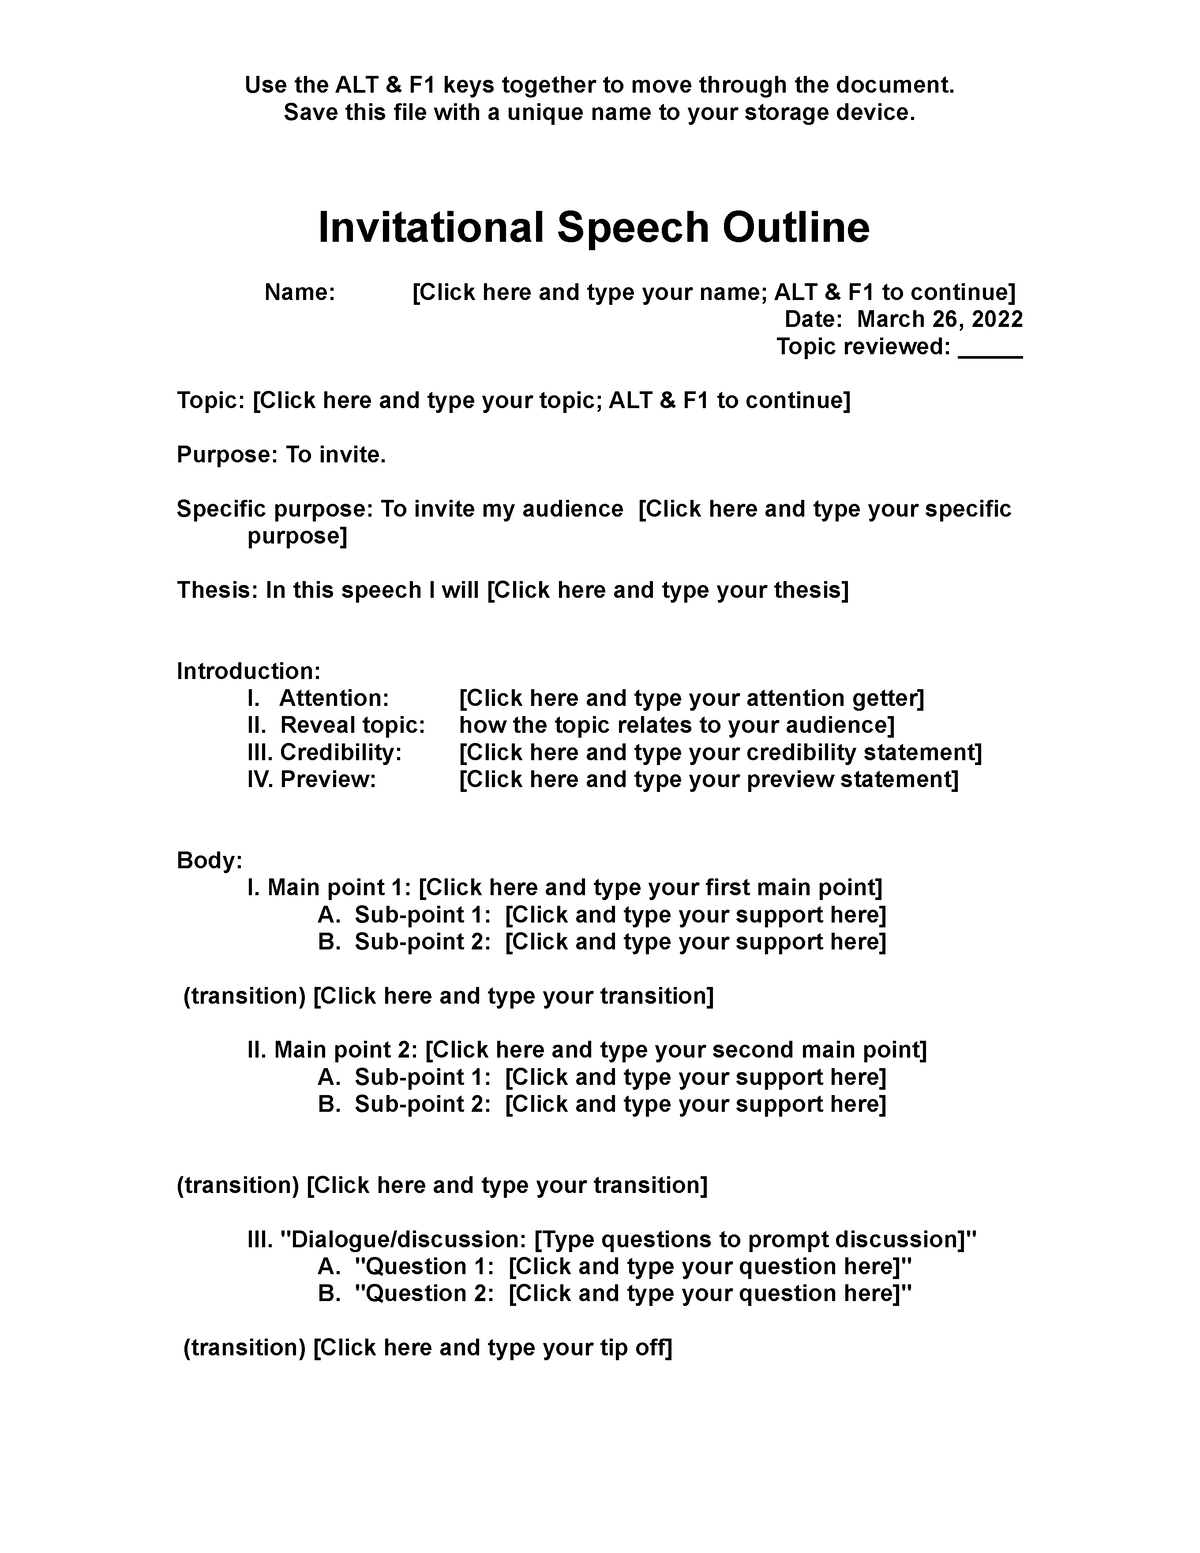 speaking outline example